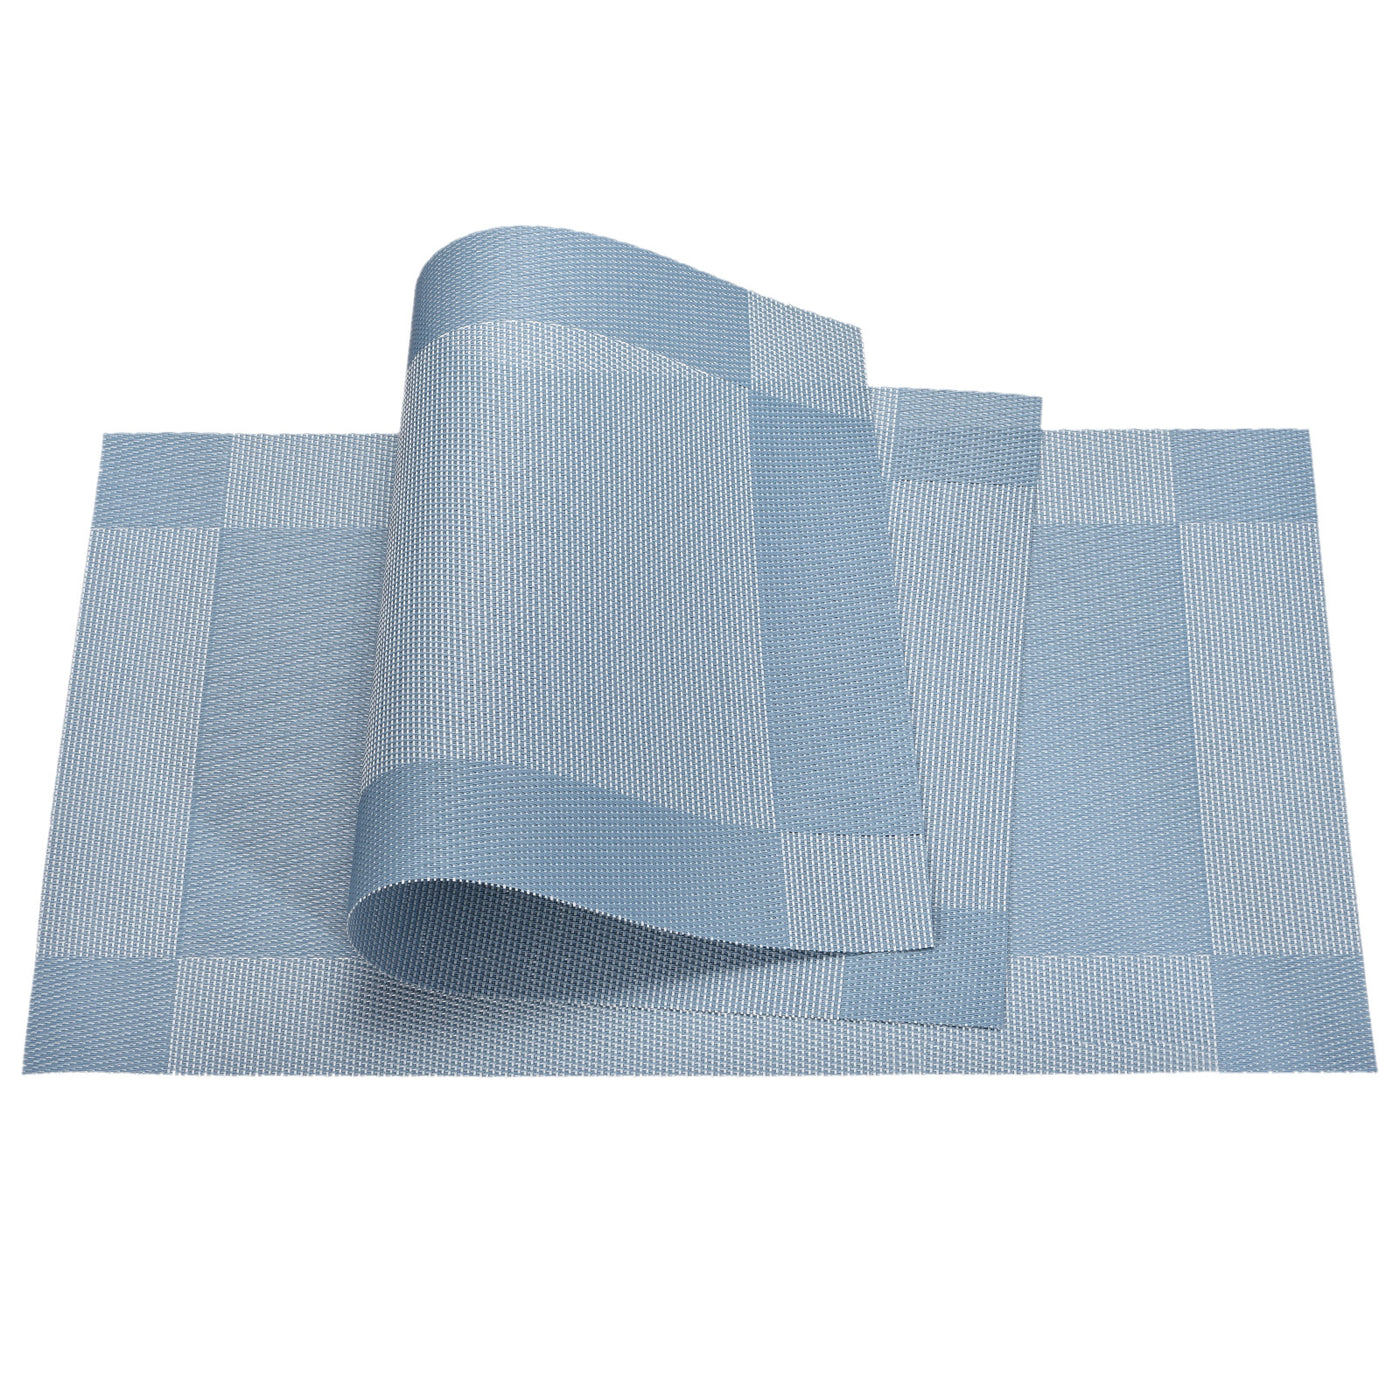 uxcell Uxcell Place Mats 450x300mm 6pcs PVC Table Washable Woven Placemat, Lake Blue